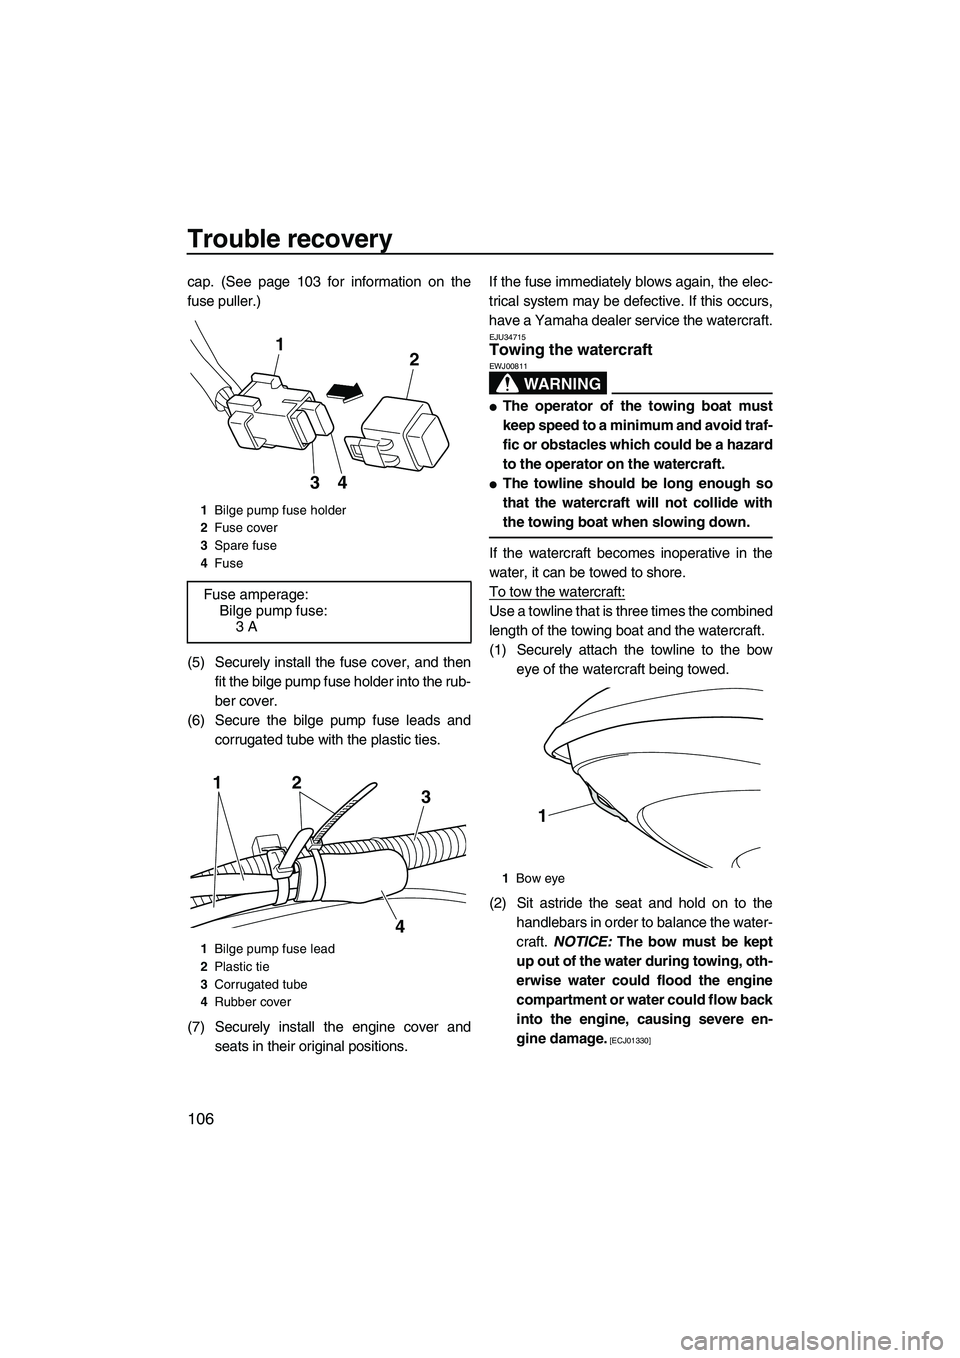 YAMAHA FX HO CRUISER 2013  Owners Manual Trouble recovery
106
cap. (See page 103 for information on the
fuse puller.)
(5) Securely install the fuse cover, and thenfit the bilge pump fuse holder into the rub-
ber cover.
(6) Secure the bilge p